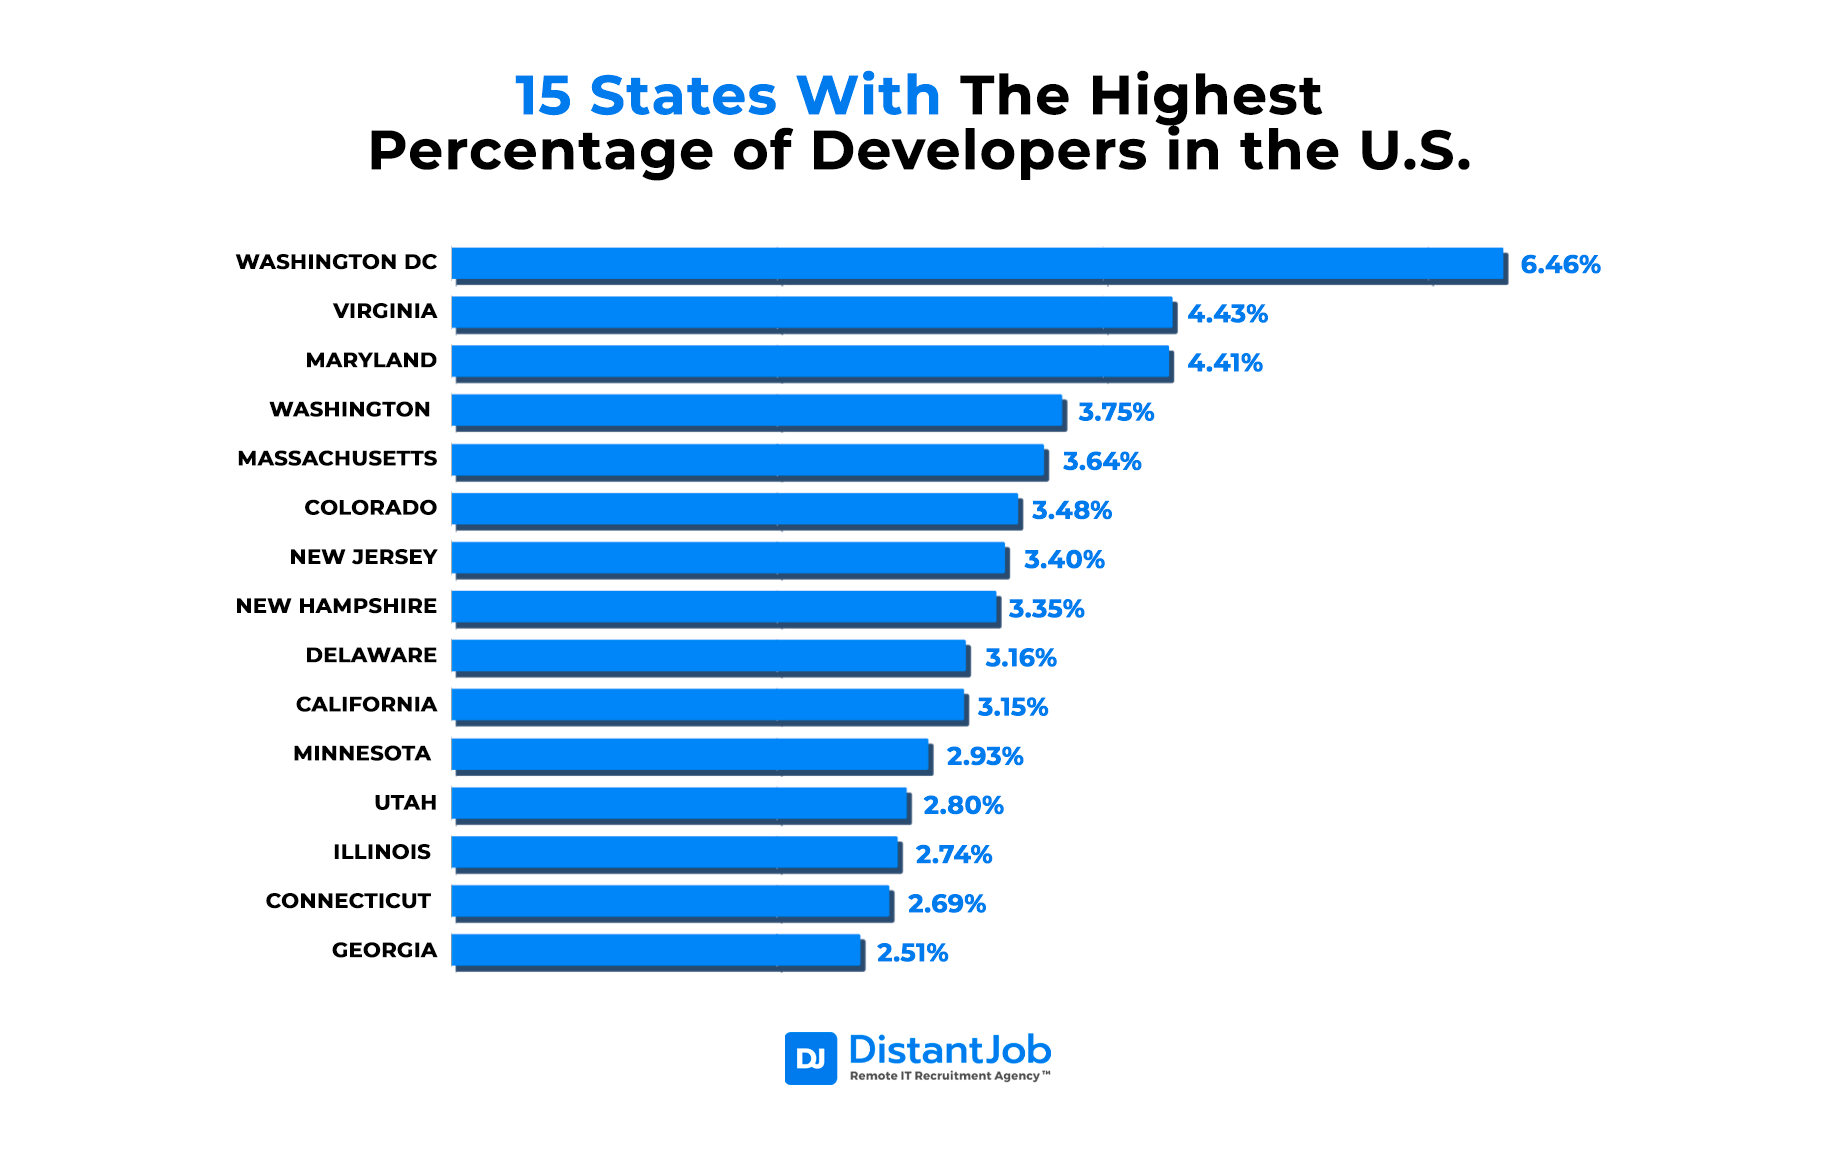 States with the highest percentage of developers